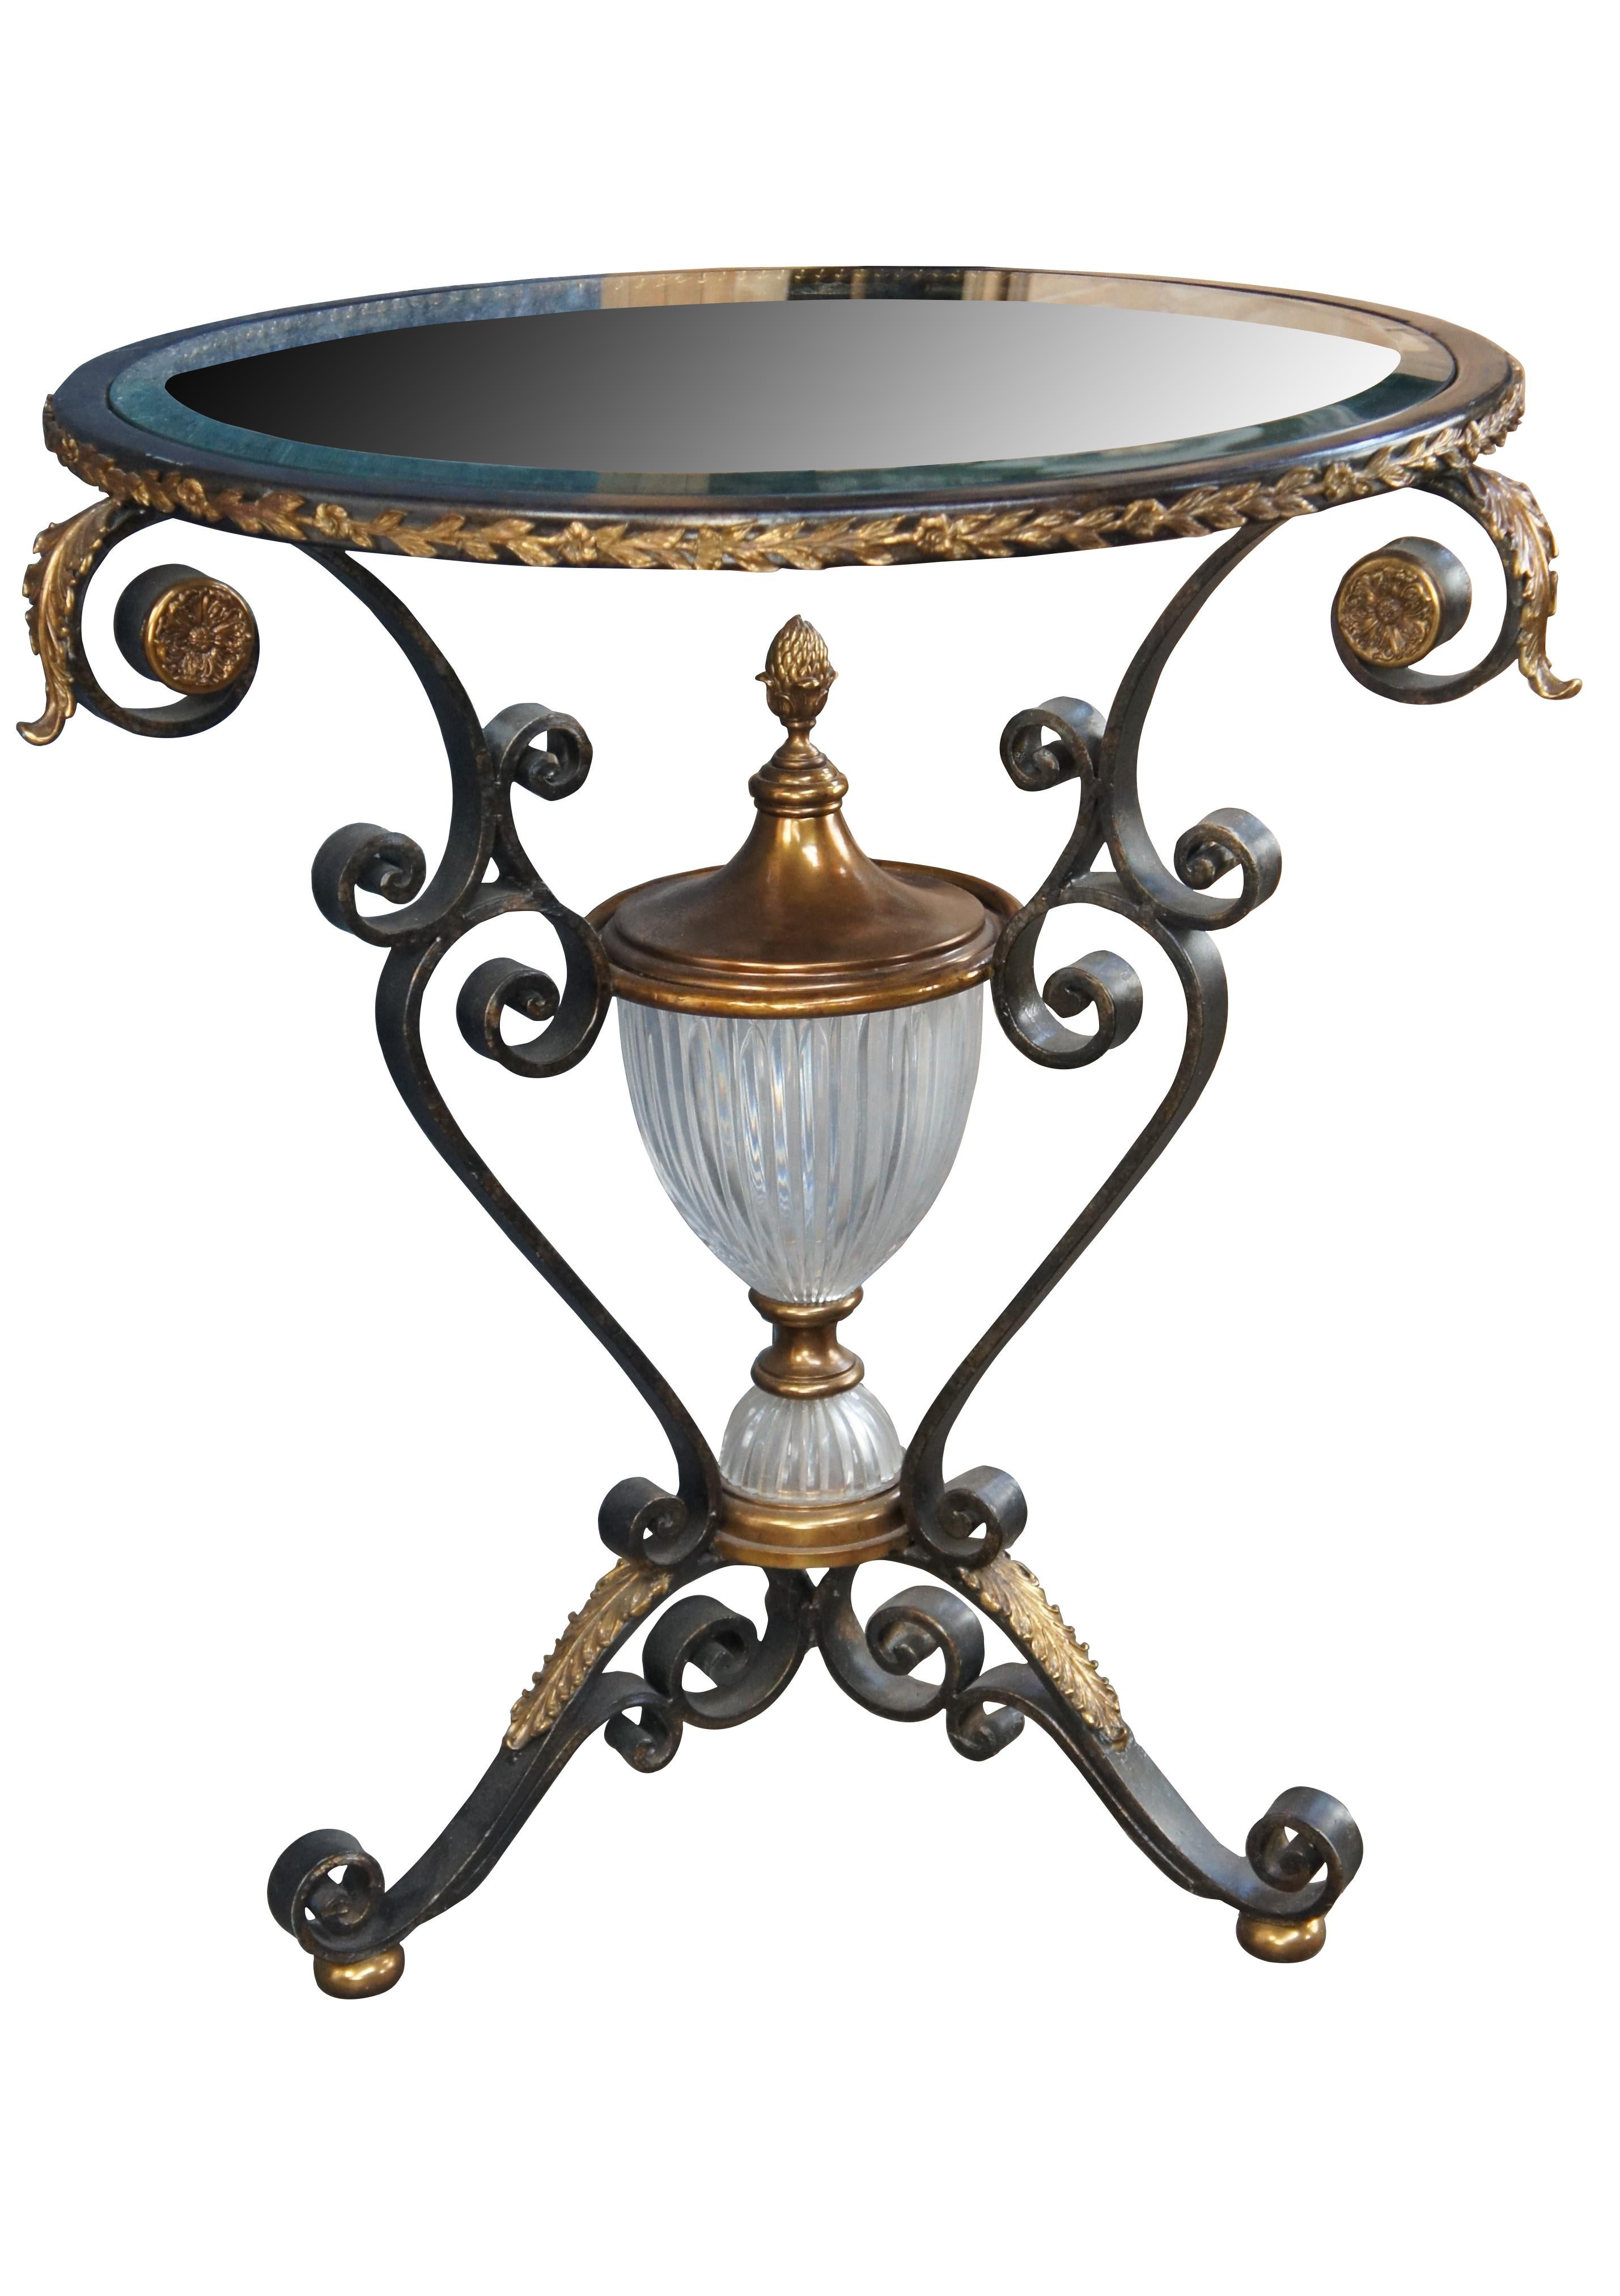 Late 20th Century Maitland Smith Side, Accent or Center Table. Drawing inspiration from French Louis XV & Italian Neoclassical styling. Features a round top over scrolled iron frame with applied brass ormolu and tripod base over gold bun feet.. The